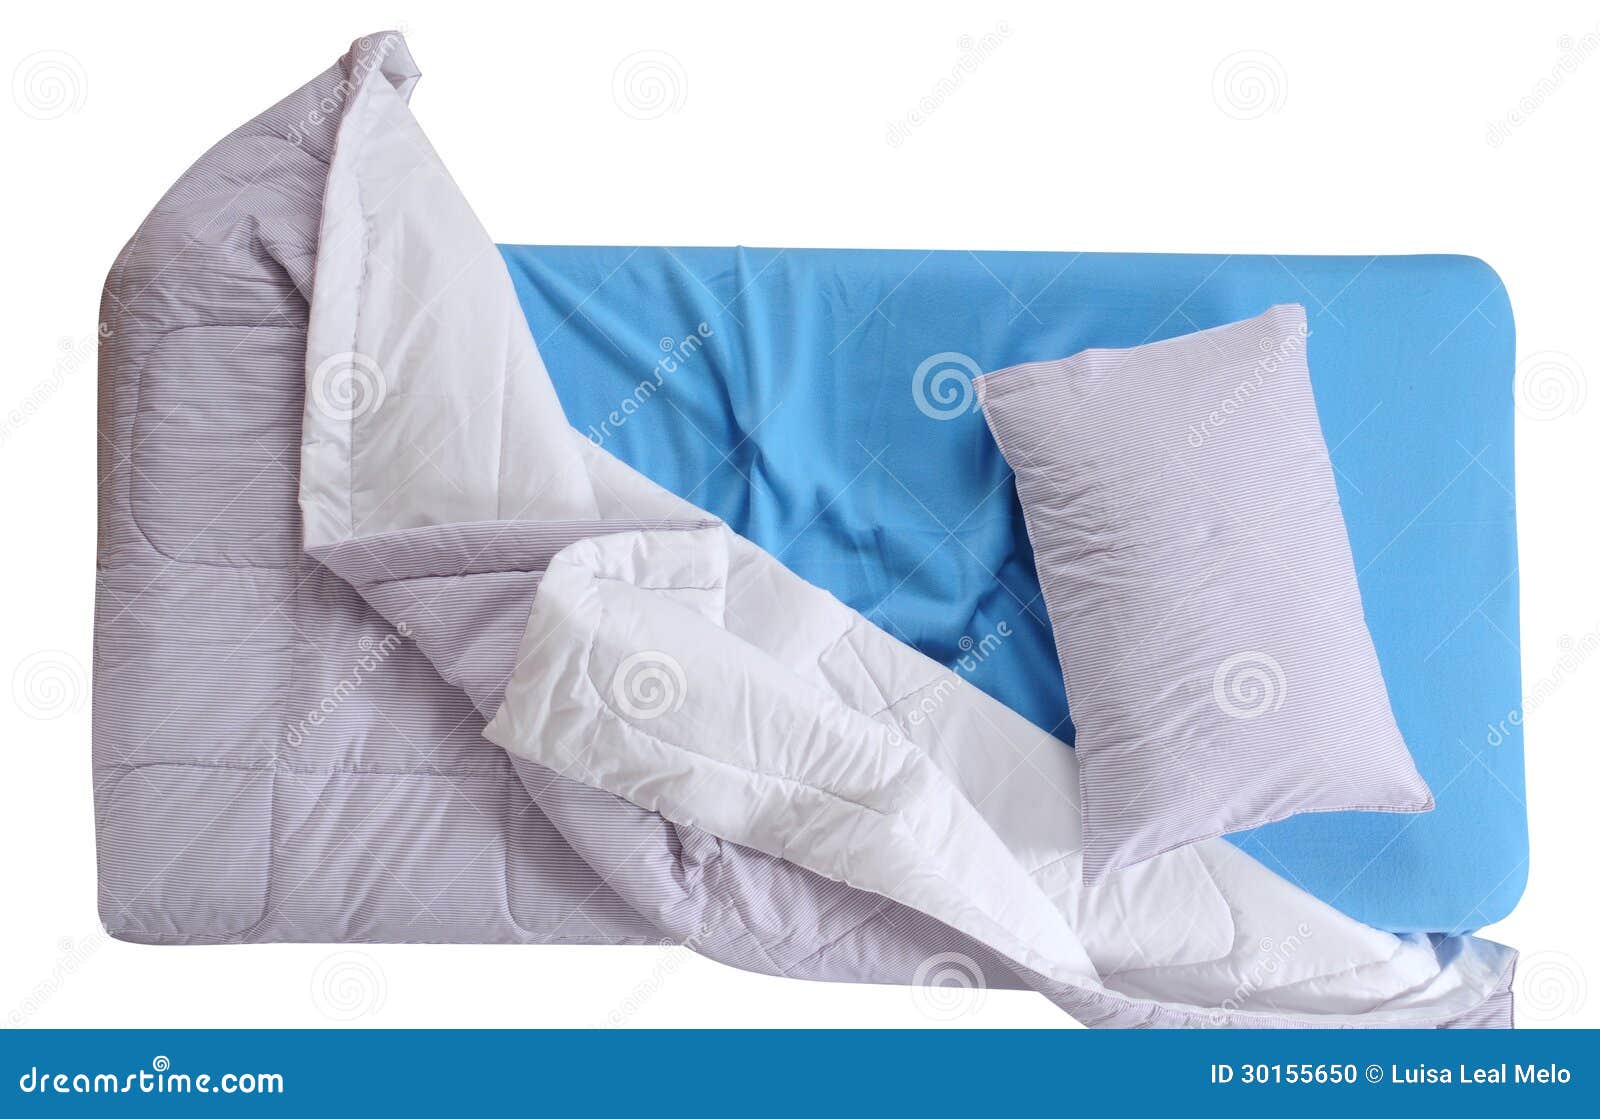 Messy Bed. Stock Photo - Image: 30155650